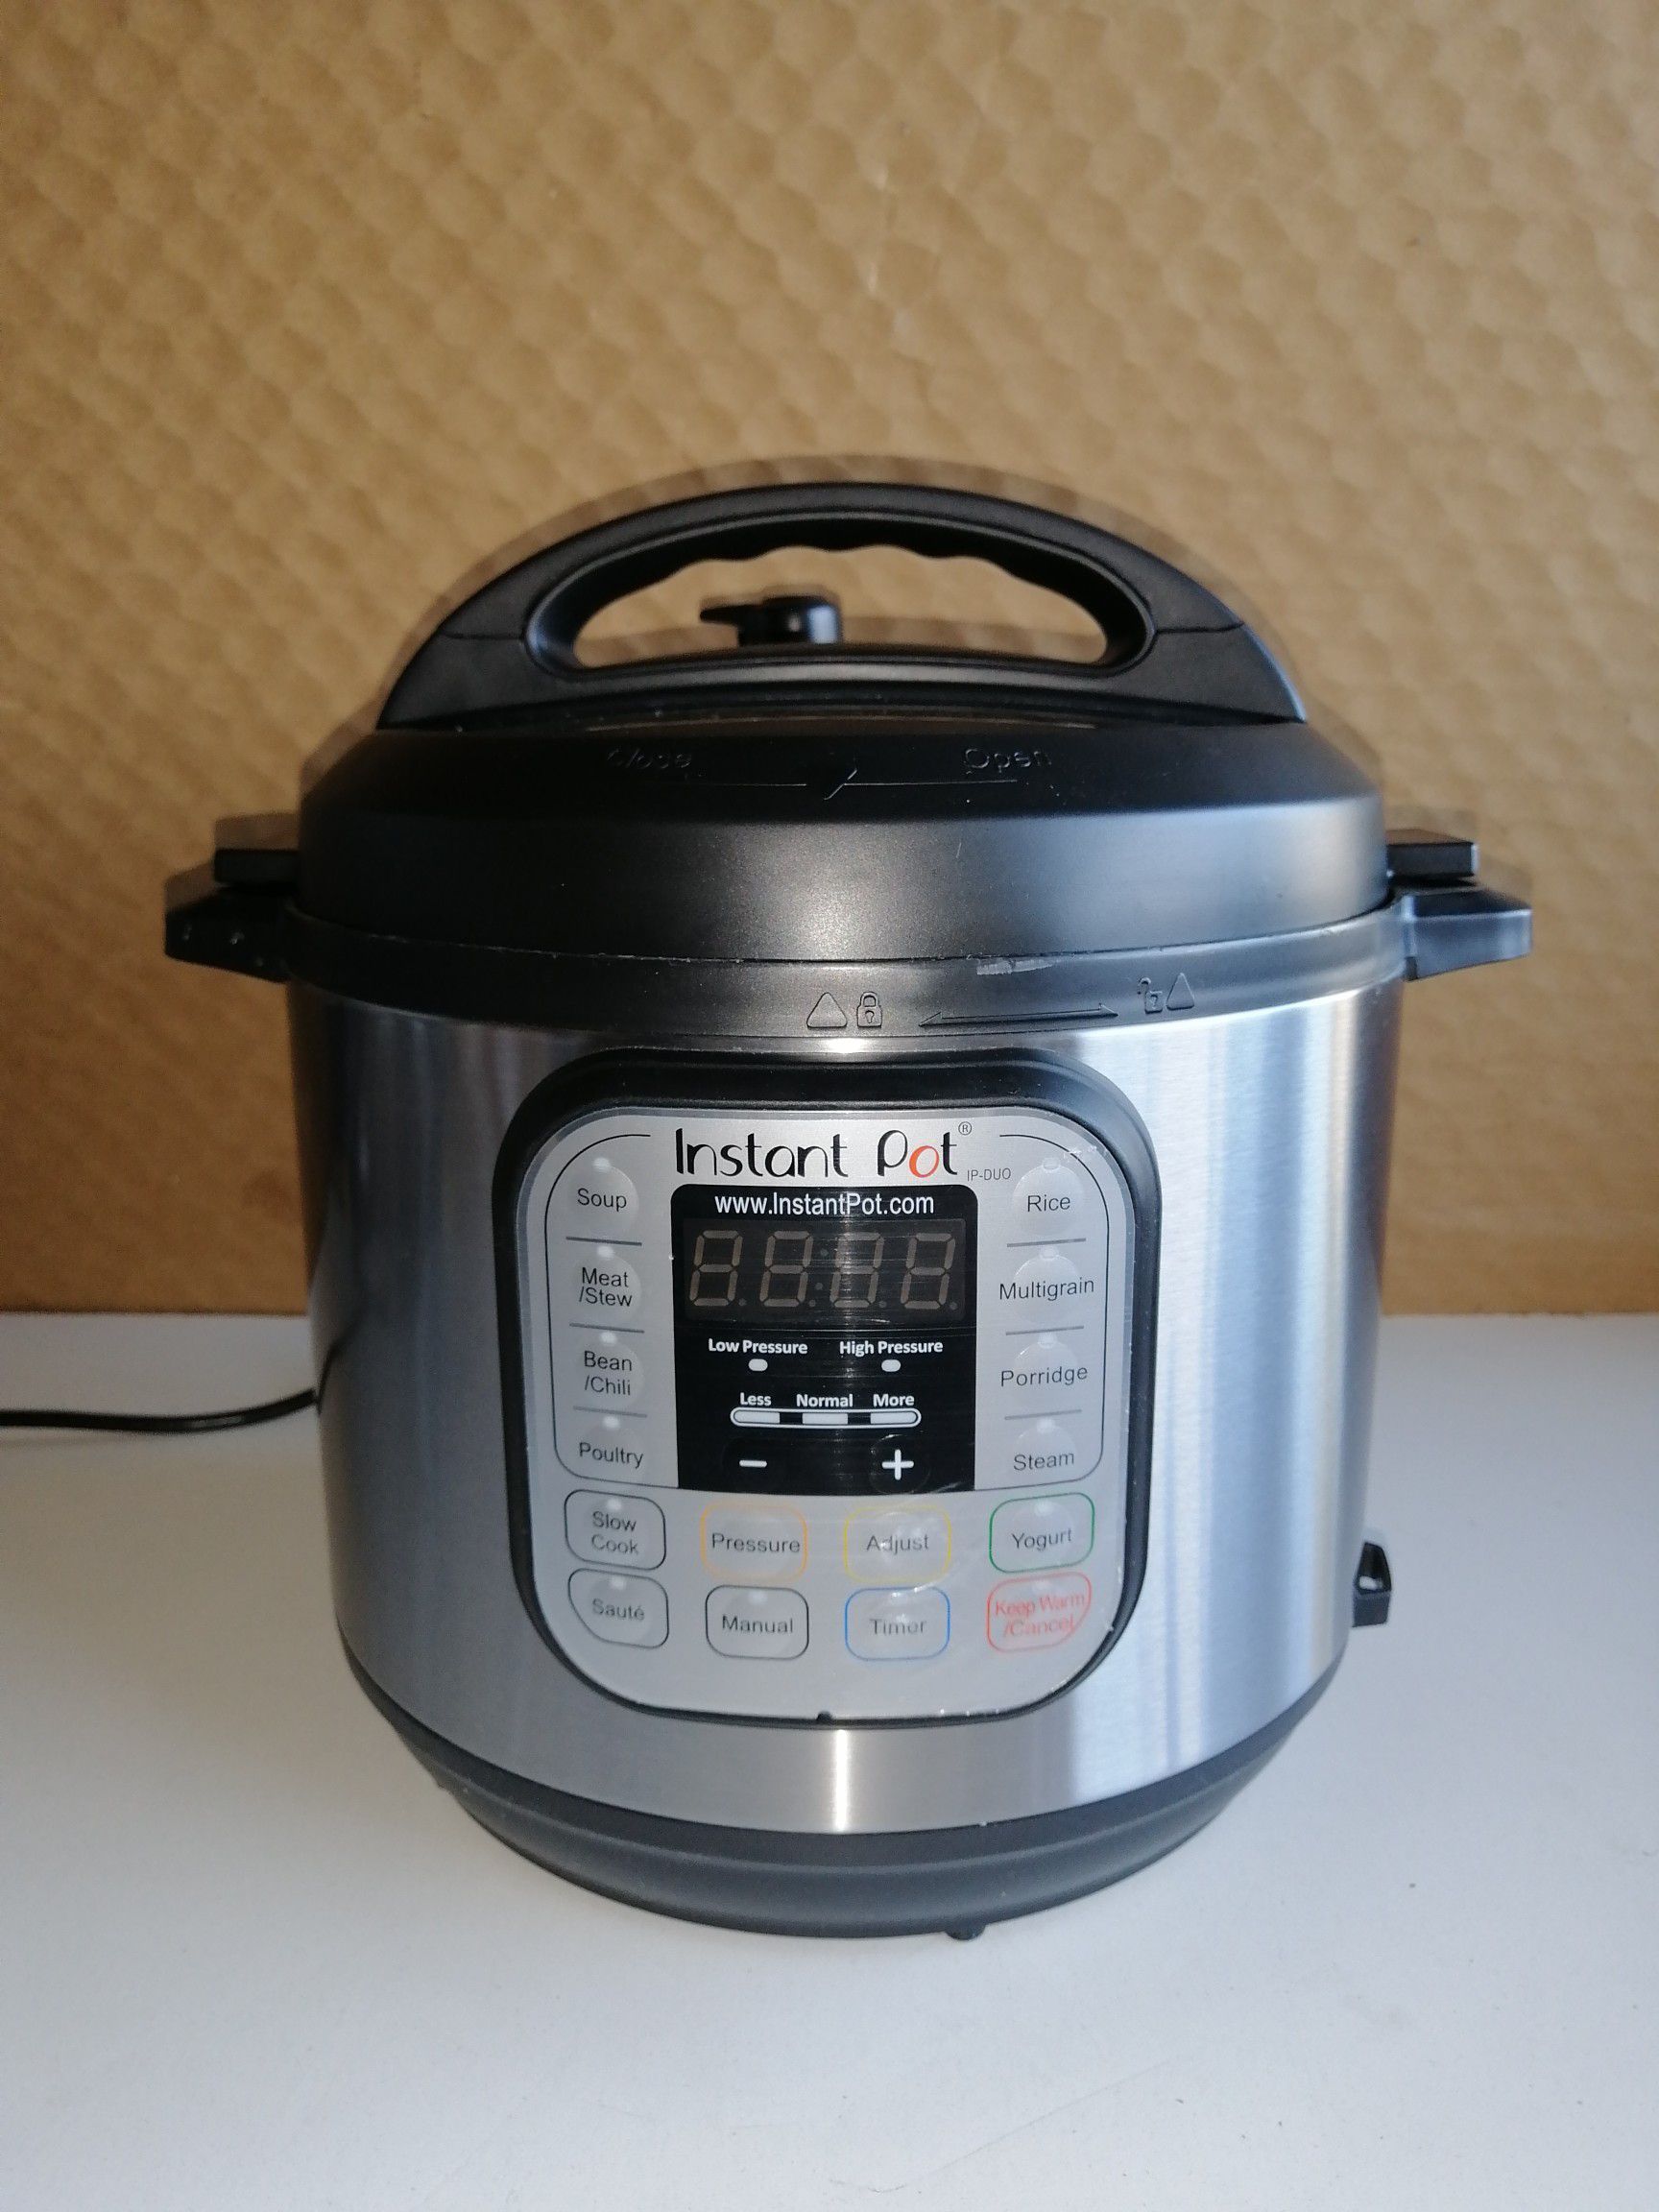 Instant Pot IP-DUO60 V2 Programmable Electric Pressure Cooker, 6Qt, 7 in1 Cooker.